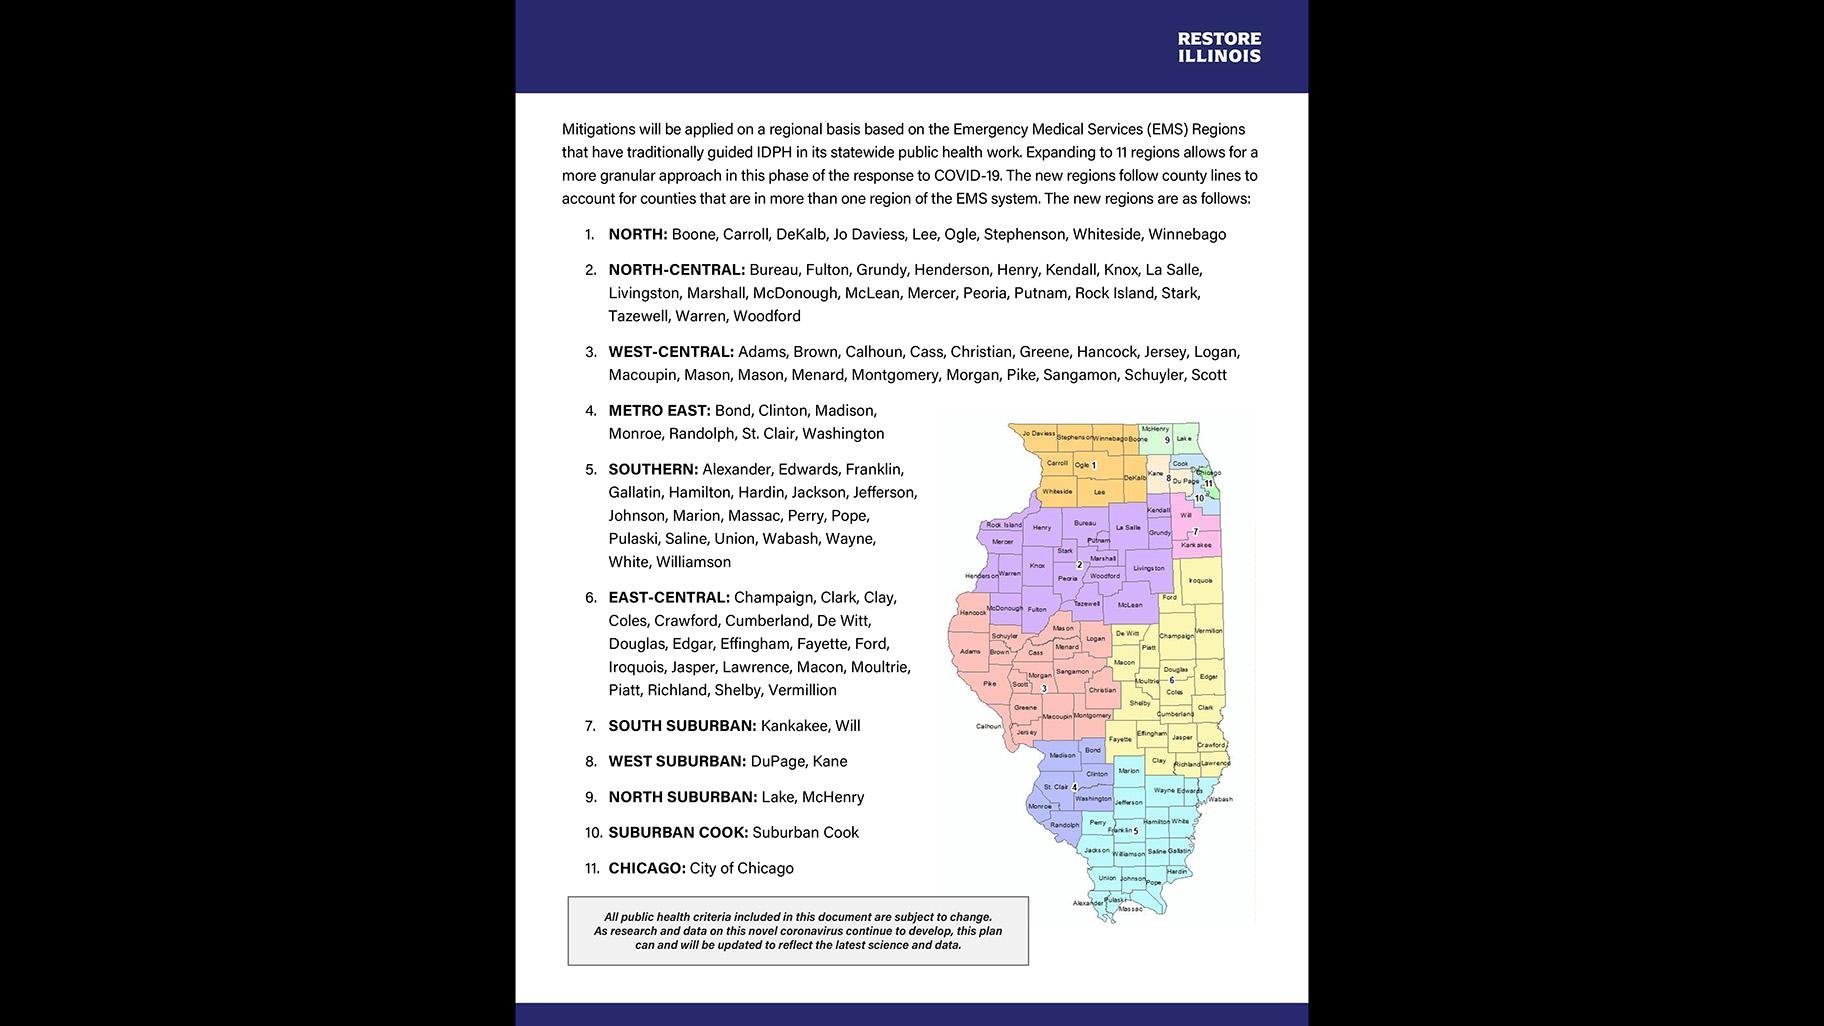 A map of Illinois’ 11 regions. (Click to see full COVID-19 mitigation plan released by Gov. J.B. Pritzker.)